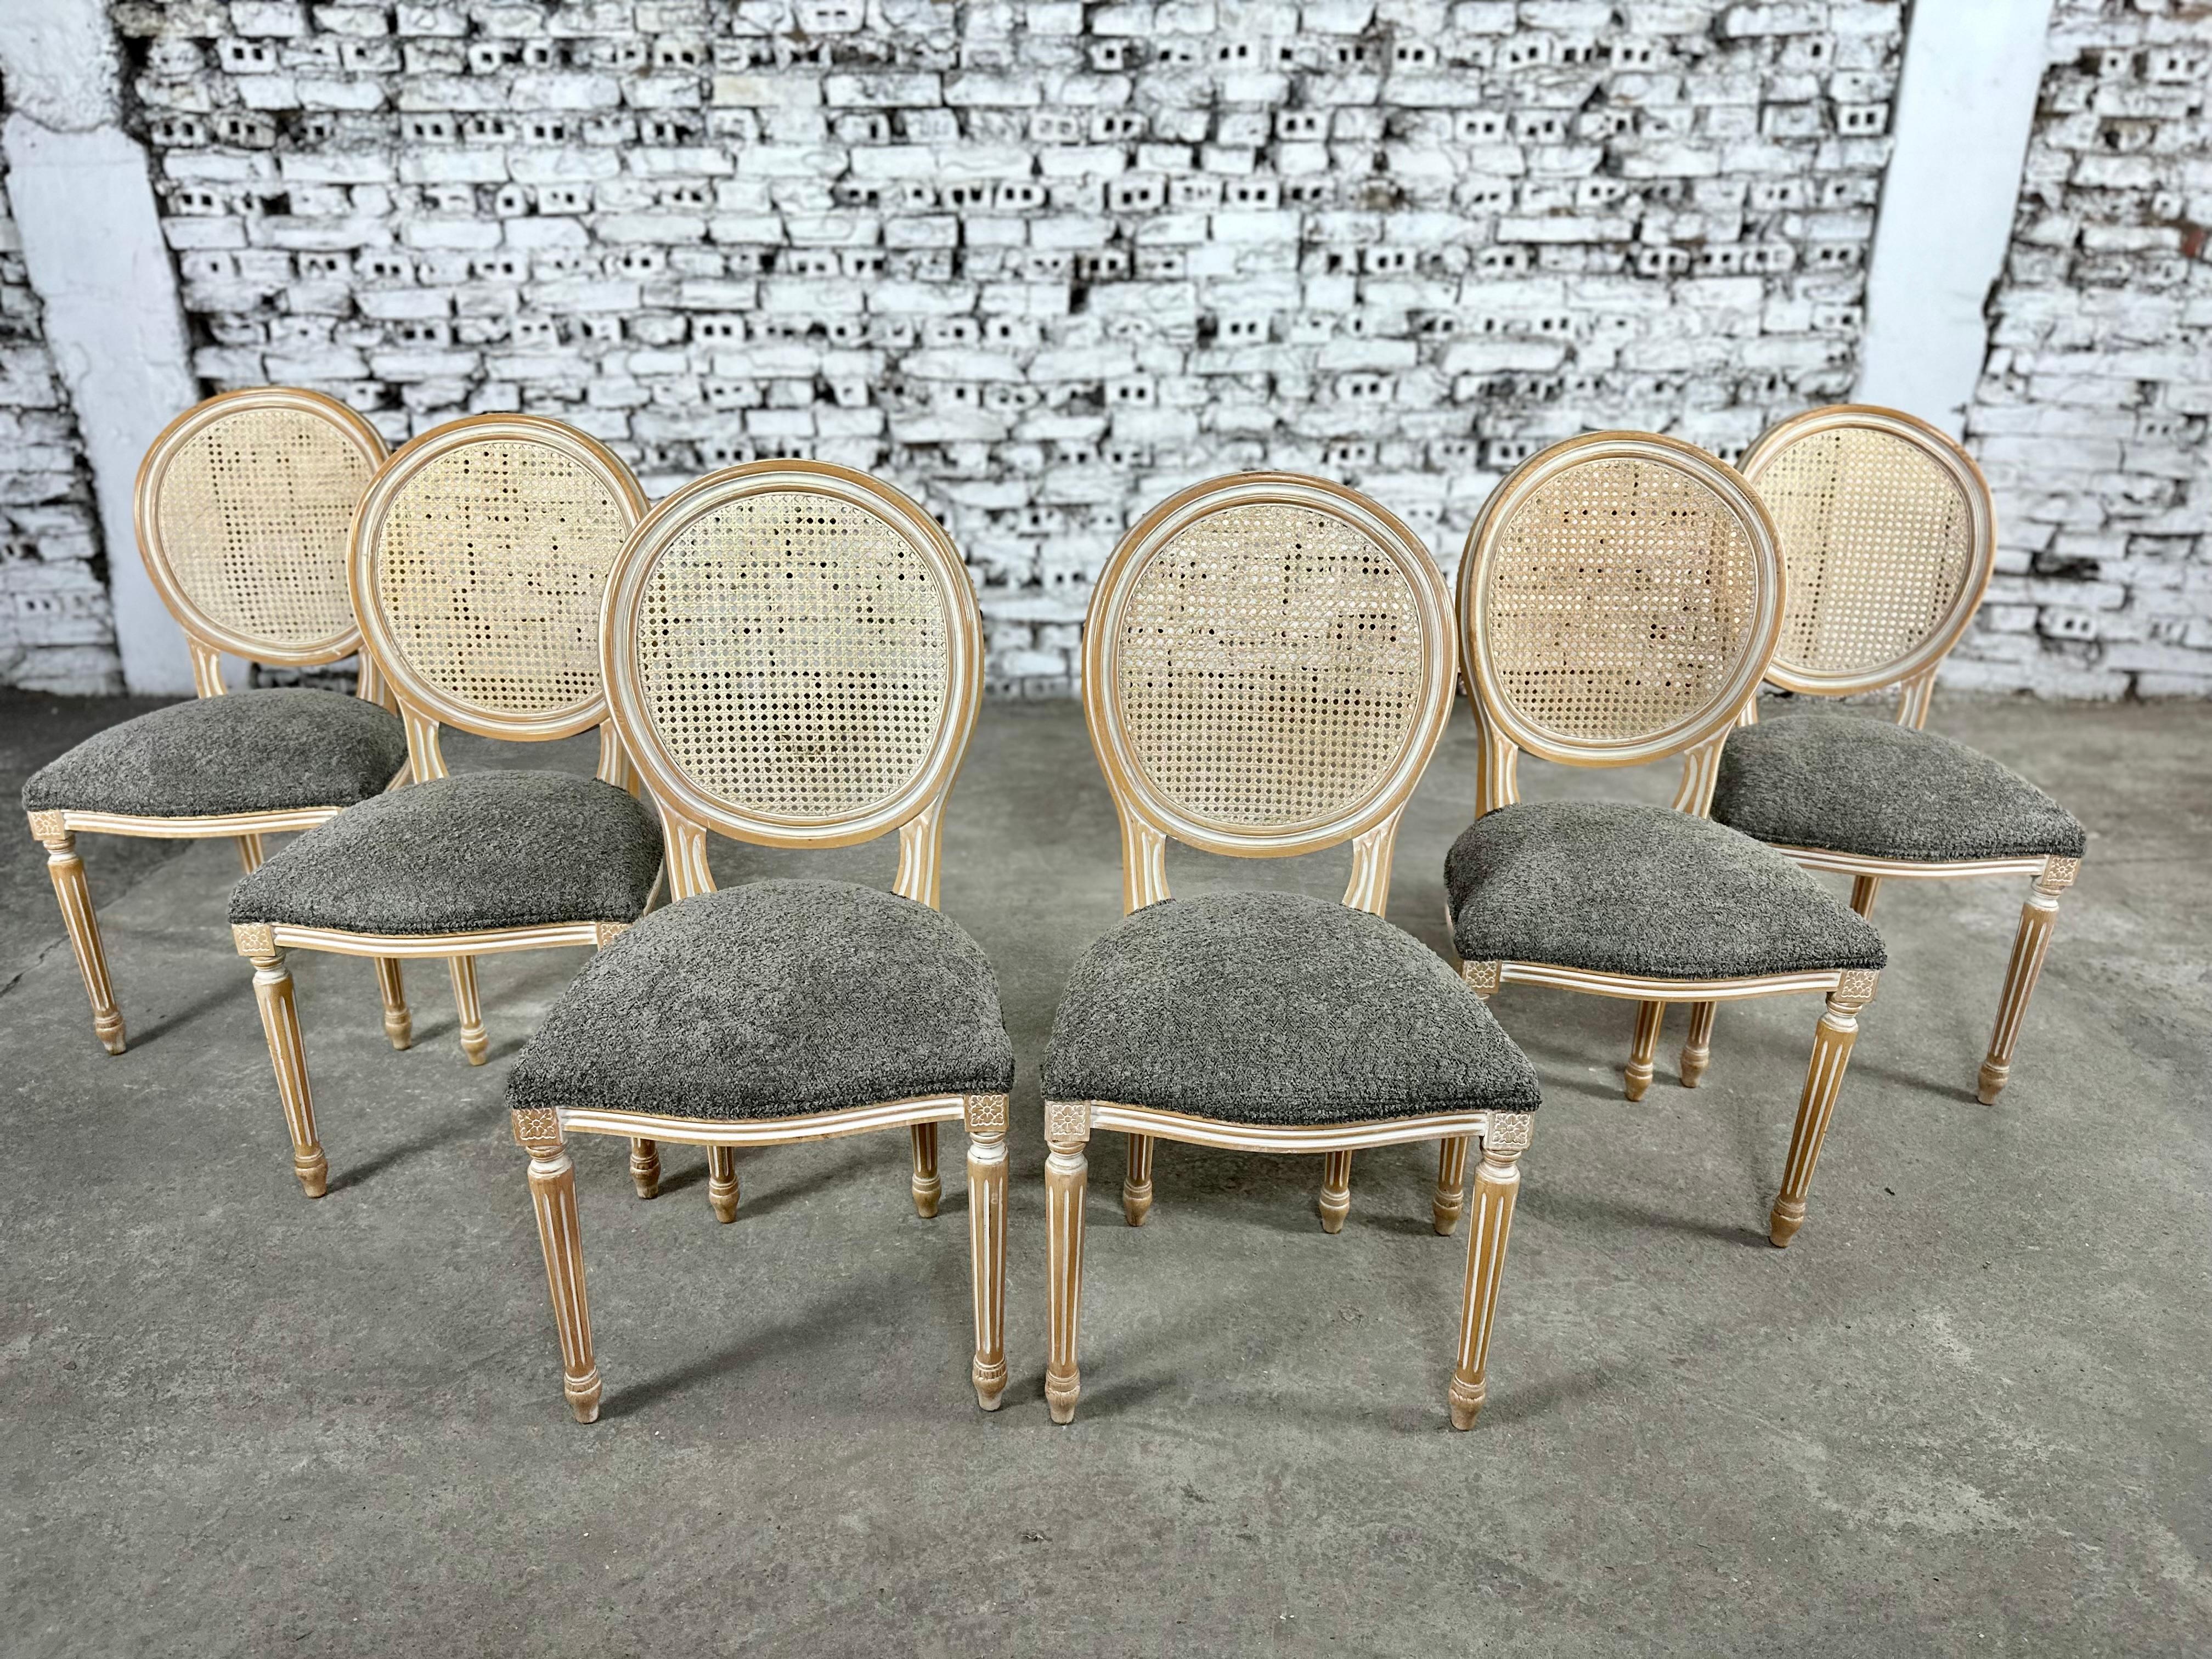 Louis XVI Medallion Cane Back Dining Chairs, Reupholstered - Set of 6 In Good Condition For Sale In Bridgeport, CT